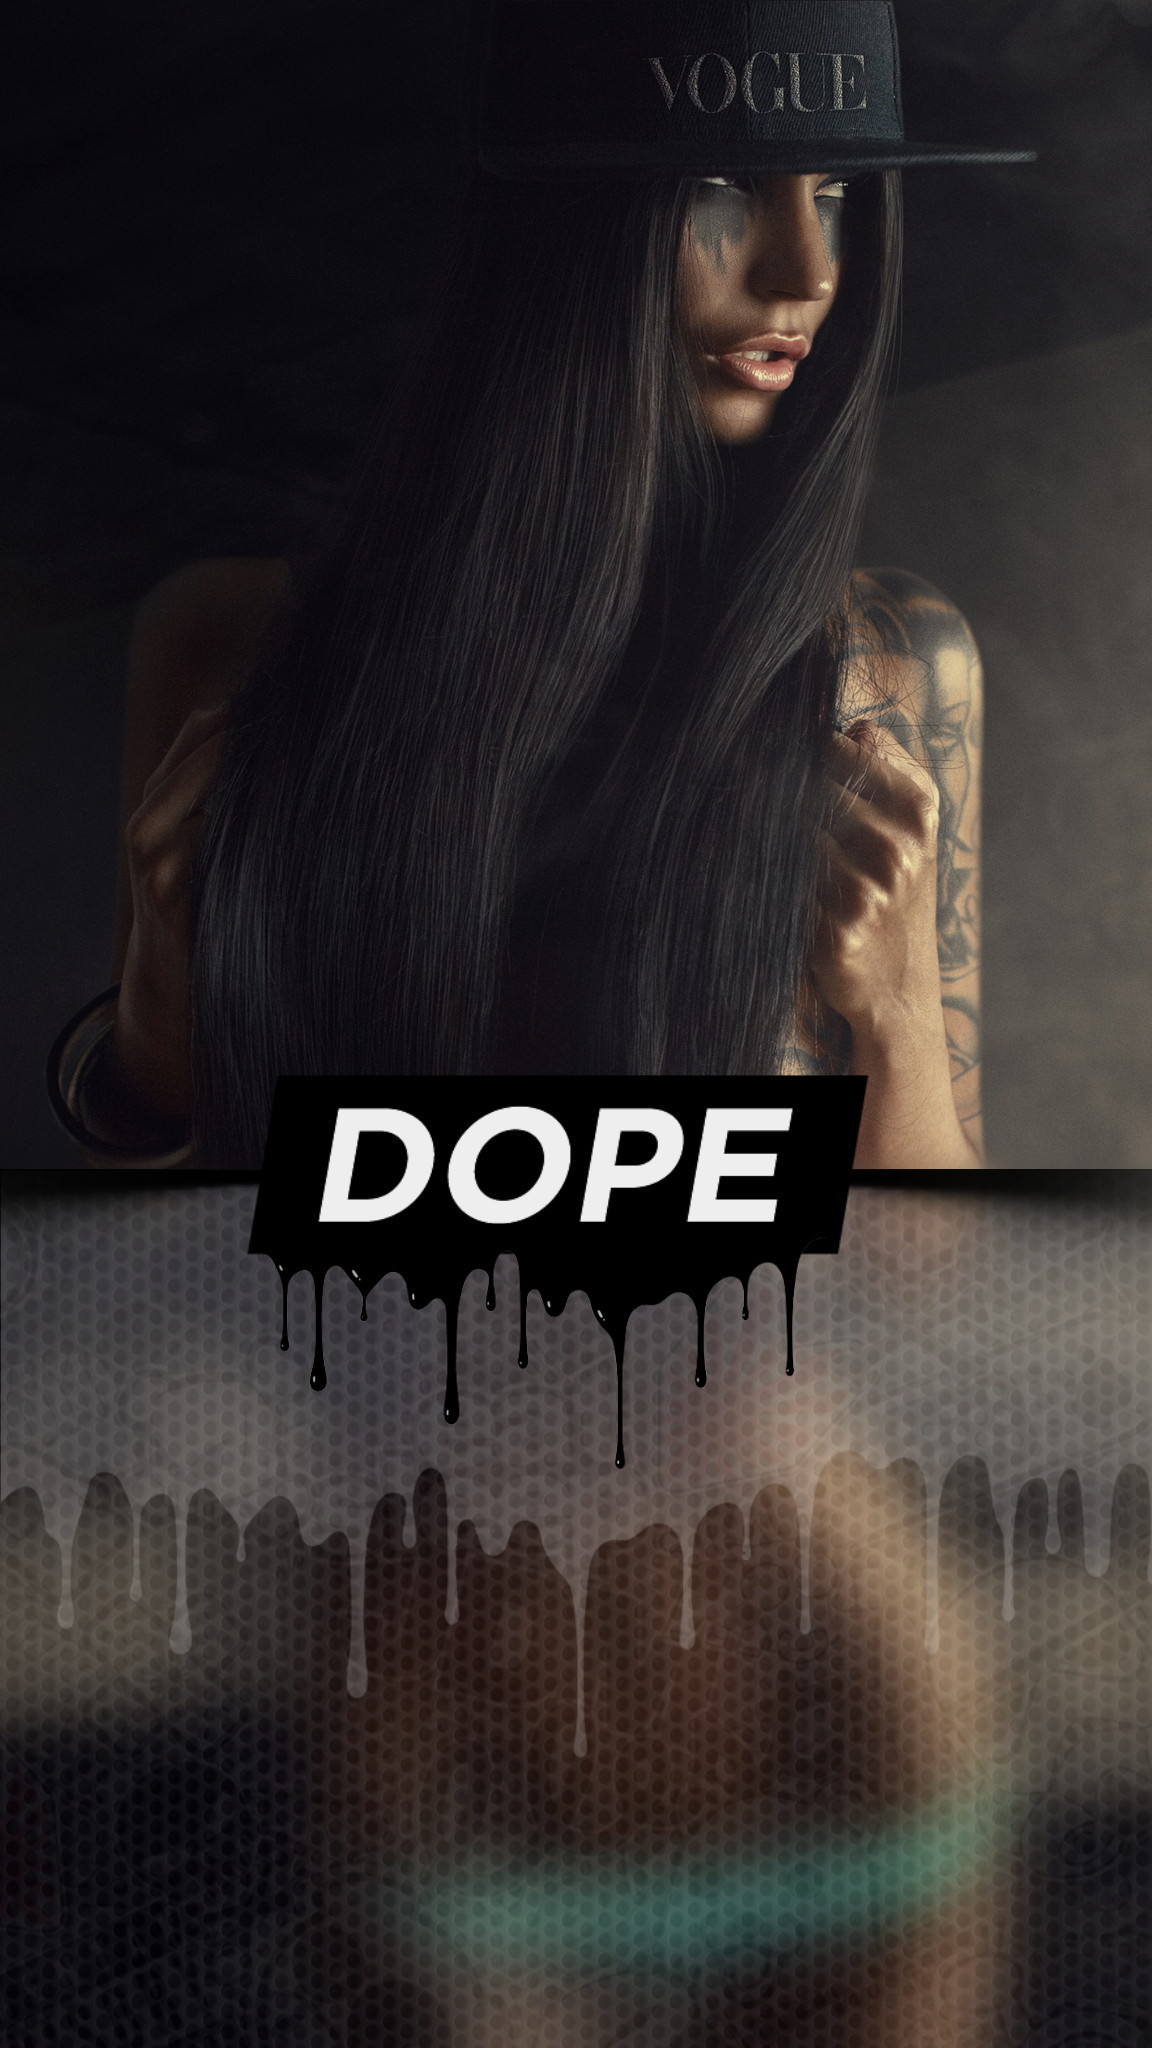 1152x2048 Dope Wallpapers, Iphone Backgrounds, Cell Phone Wallpapers, Girls Club, Bad  Girls, Gangsta Girl, Dope Art, Art Girl, Hiphop